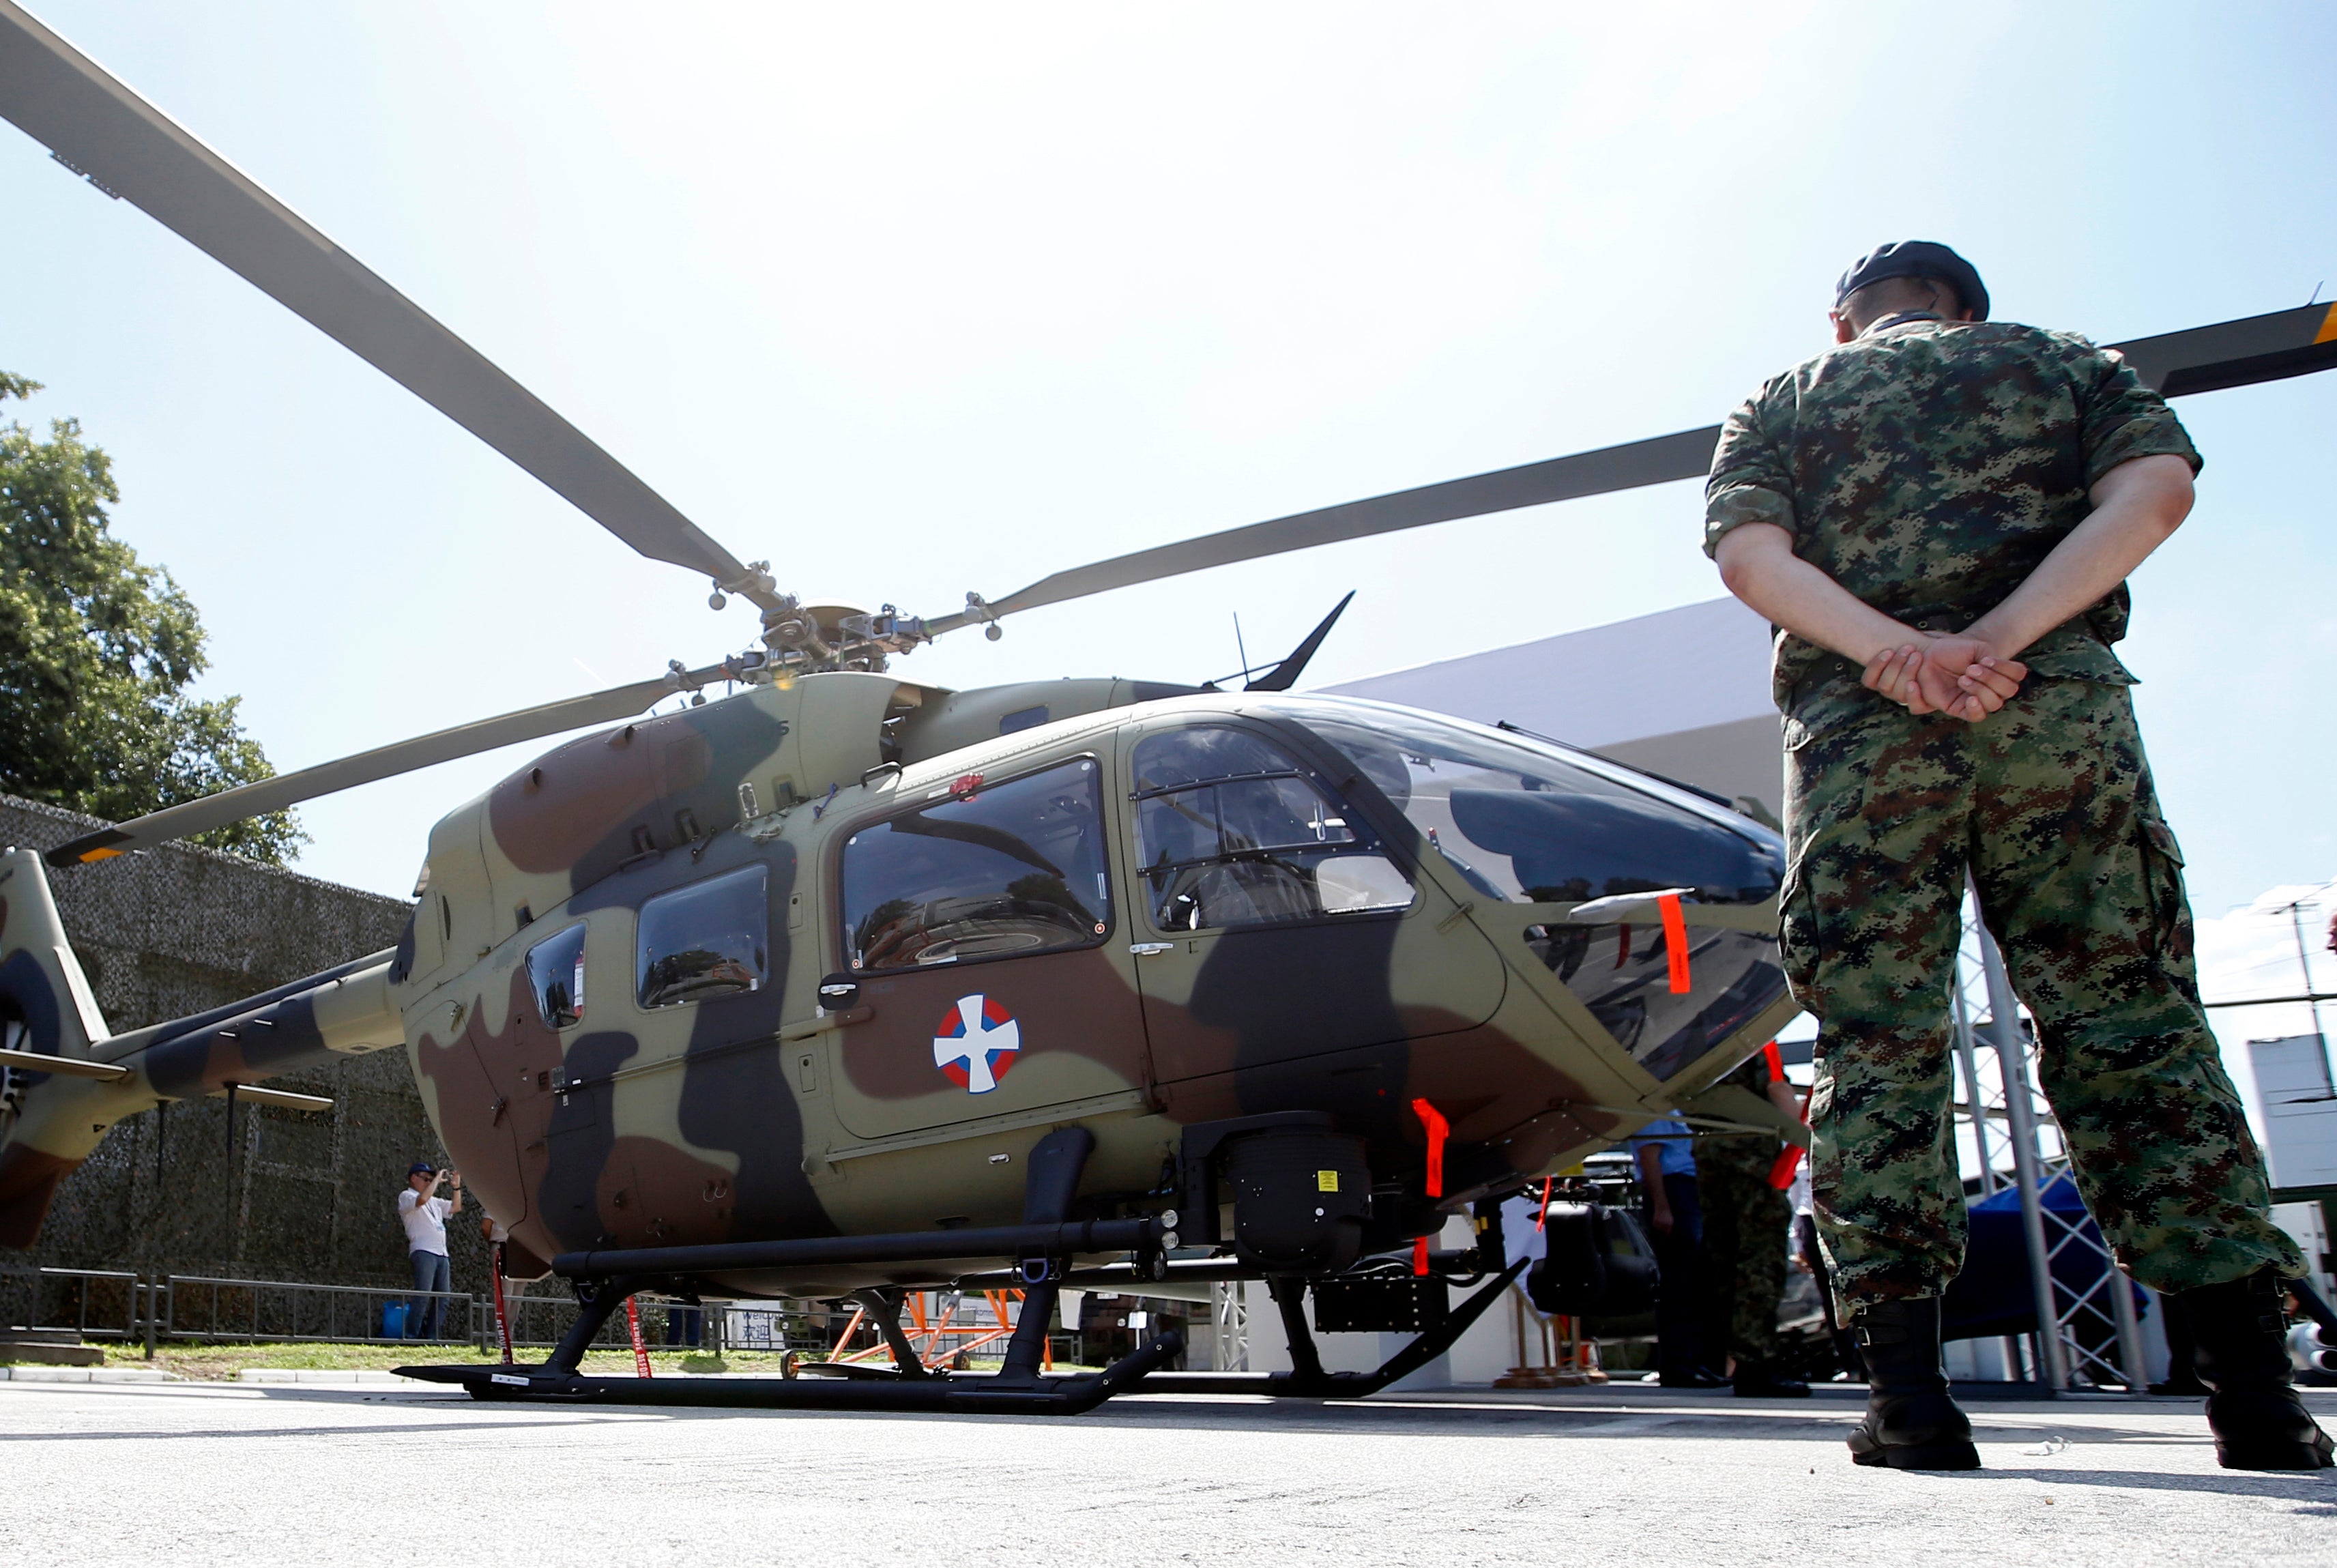 A Serbian army officer stands by an Airbus H145M multi-utility helicopter during an arms fair in Belgrade